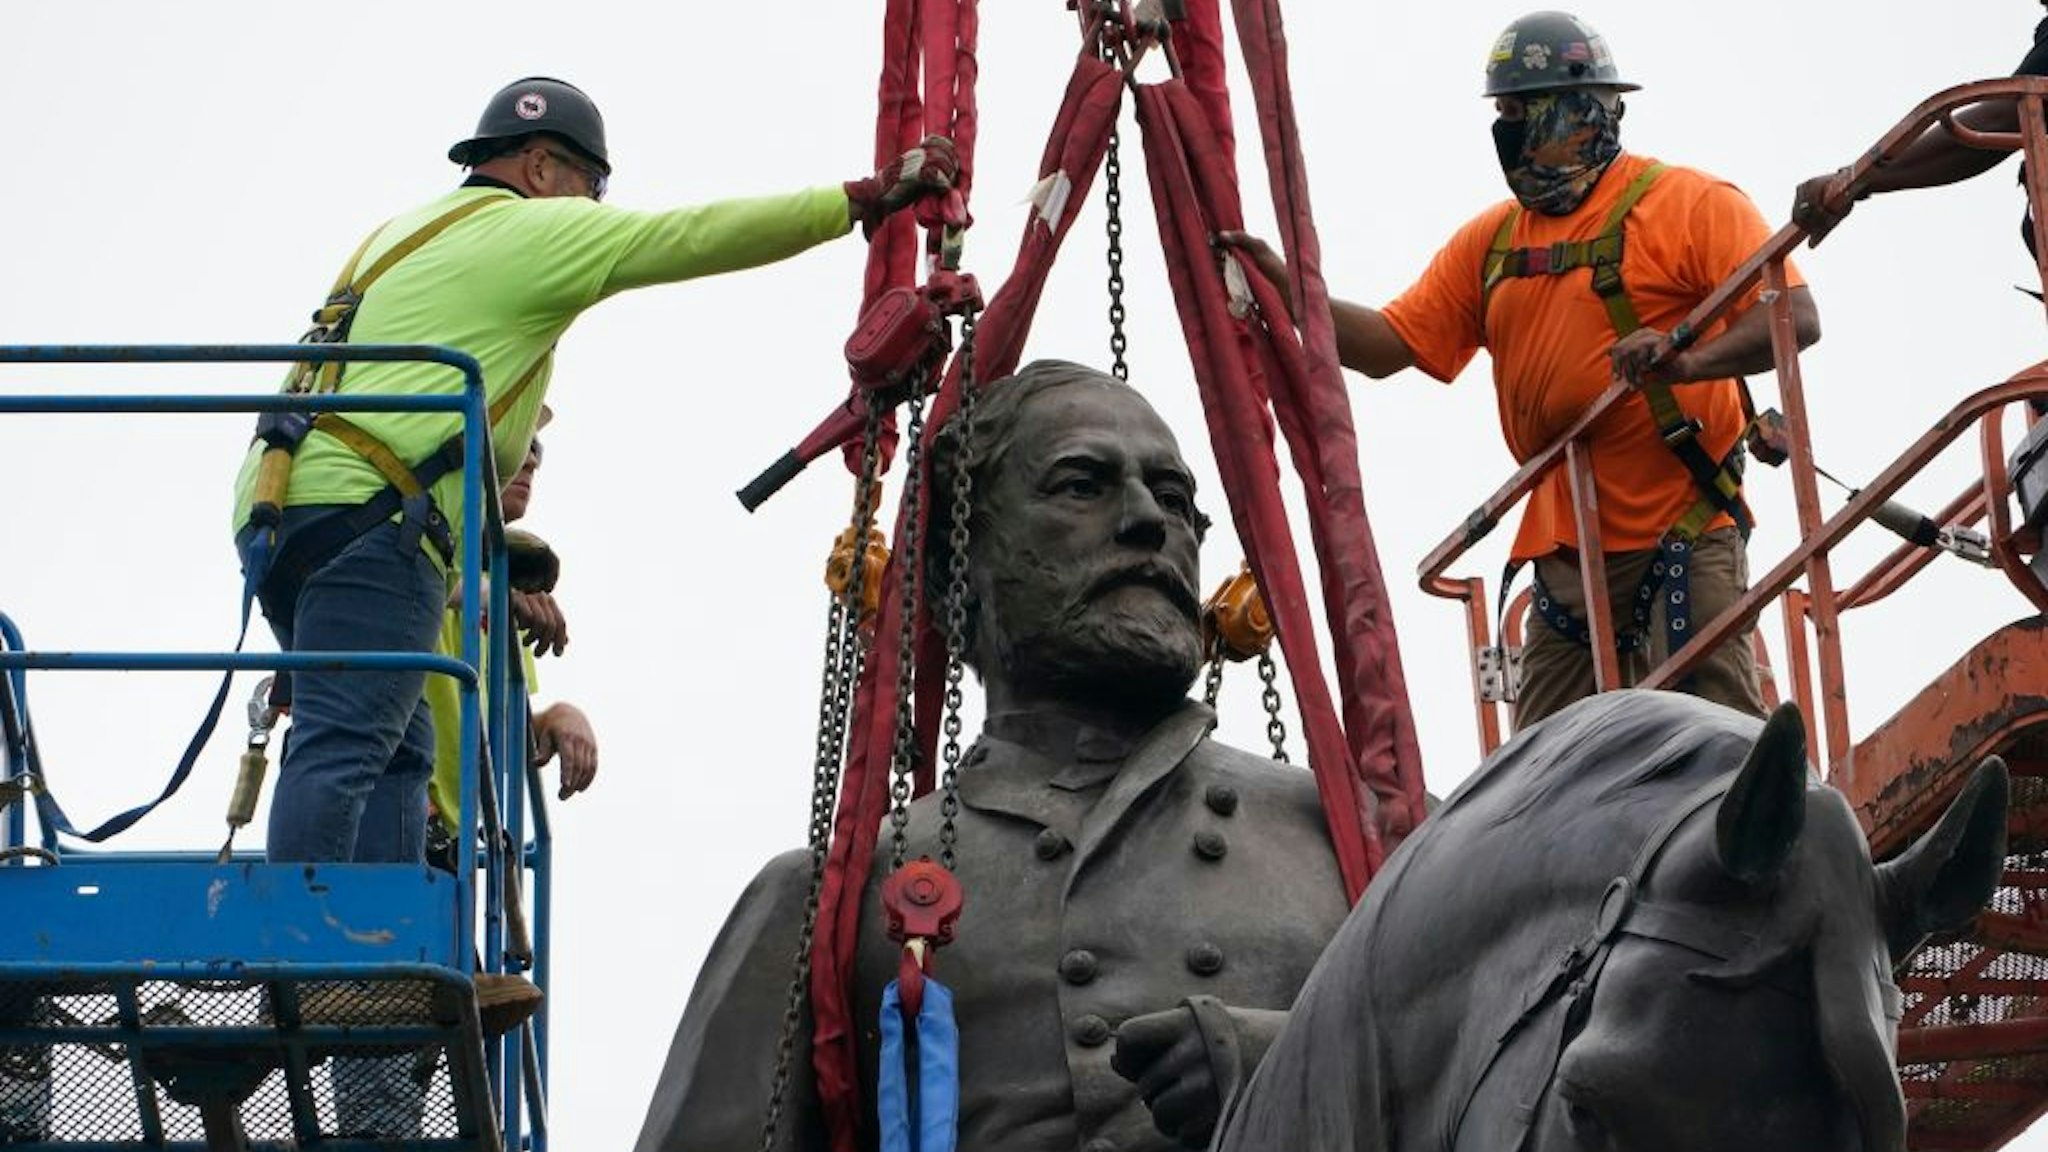 RICHMOND, VIRGINIA - SEPTEMBER 08: Crews prepare to remove one of the country's largest remaining monuments to the Confederacy, a towering statue of Confederate General Robert E. Lee on Monument Avenue, September 8, 2021 in Richmond, Virginia. The Commonwealth of Virginia is removing the largest Confederate statue remaining in the U.S. following authorization by all three branches of state government, including a unanimous decision by the Supreme Court of Virginia. September 8, 2021 in Richmond, Virginia. The Commonwealth of Virginia is removing the largest Confederate statue remaining in the U.S. following authorization by all three branches of state government, including a unanimous decision by the Supreme Court of Virginia.